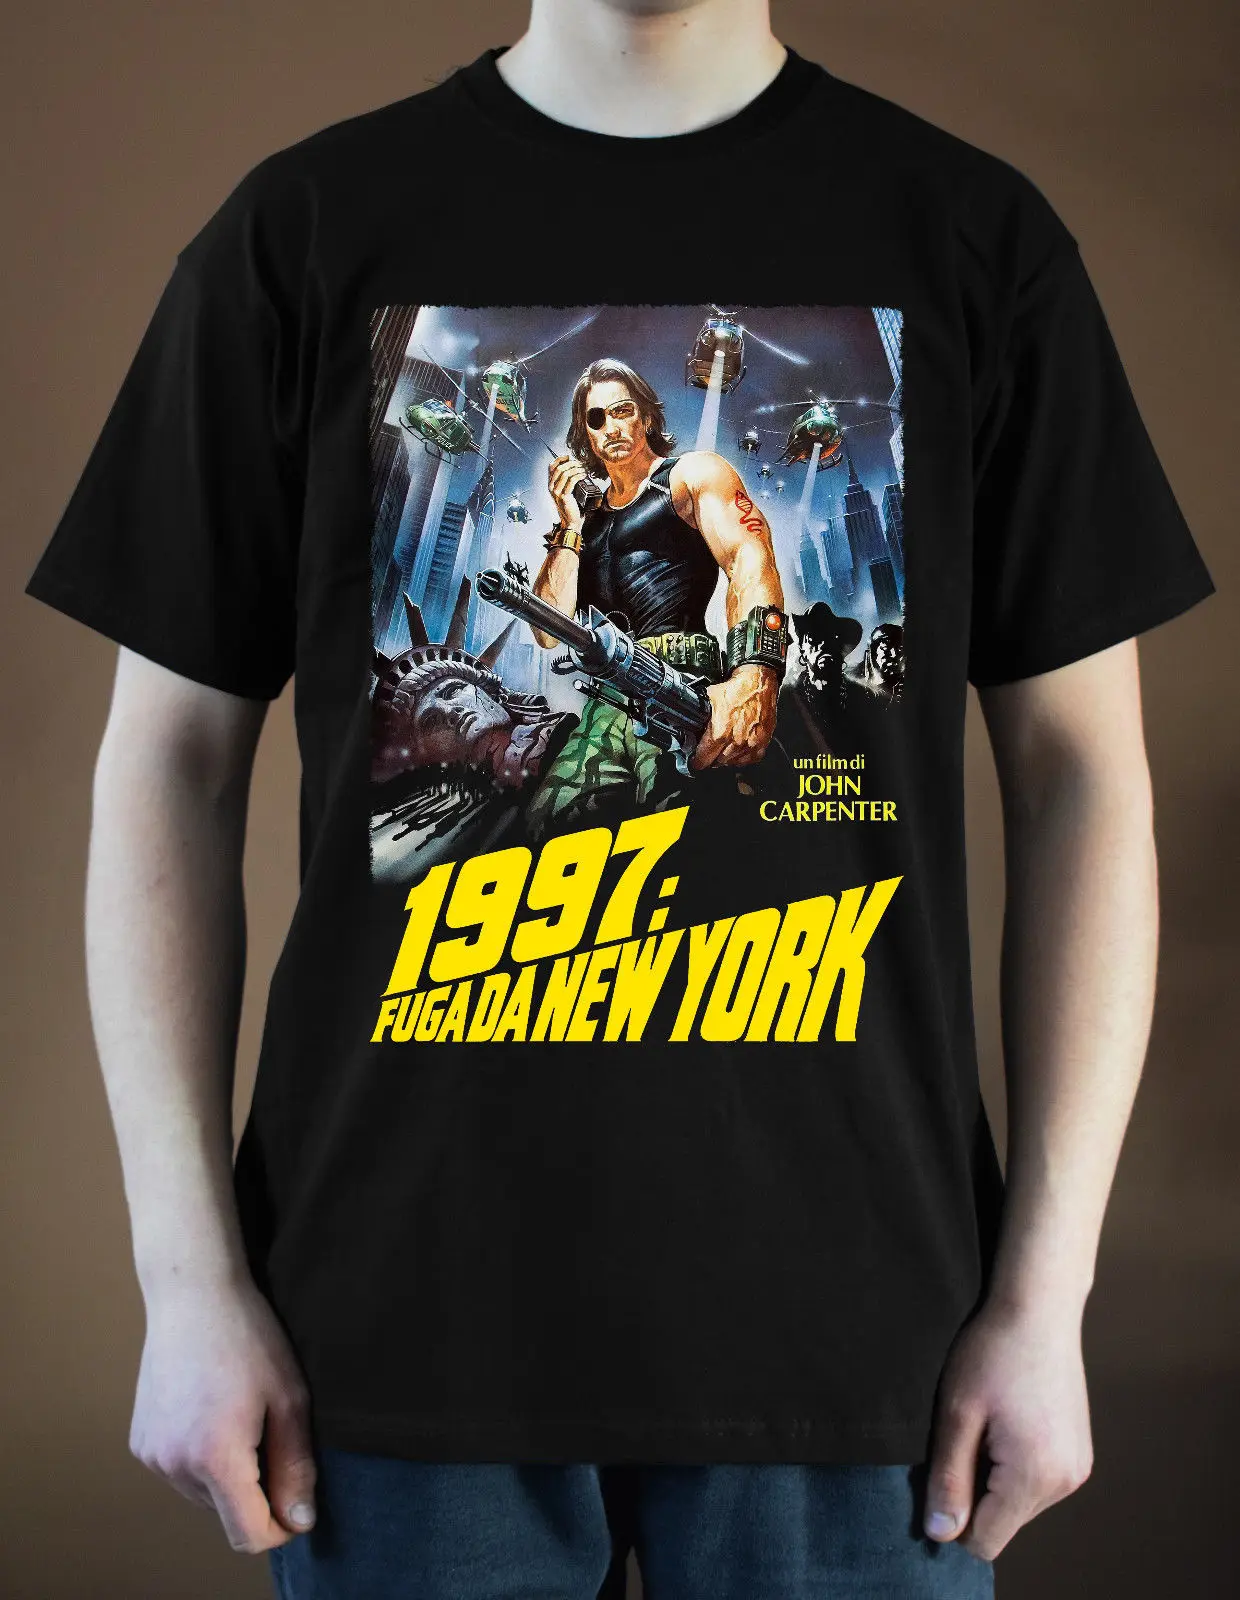 

ESCAPE FROM NEW YORK Movie poster ver. 3 Kurt Russell T-Shirt (Black) S-3XL Sleeve Tee Shirt Homme T shirts